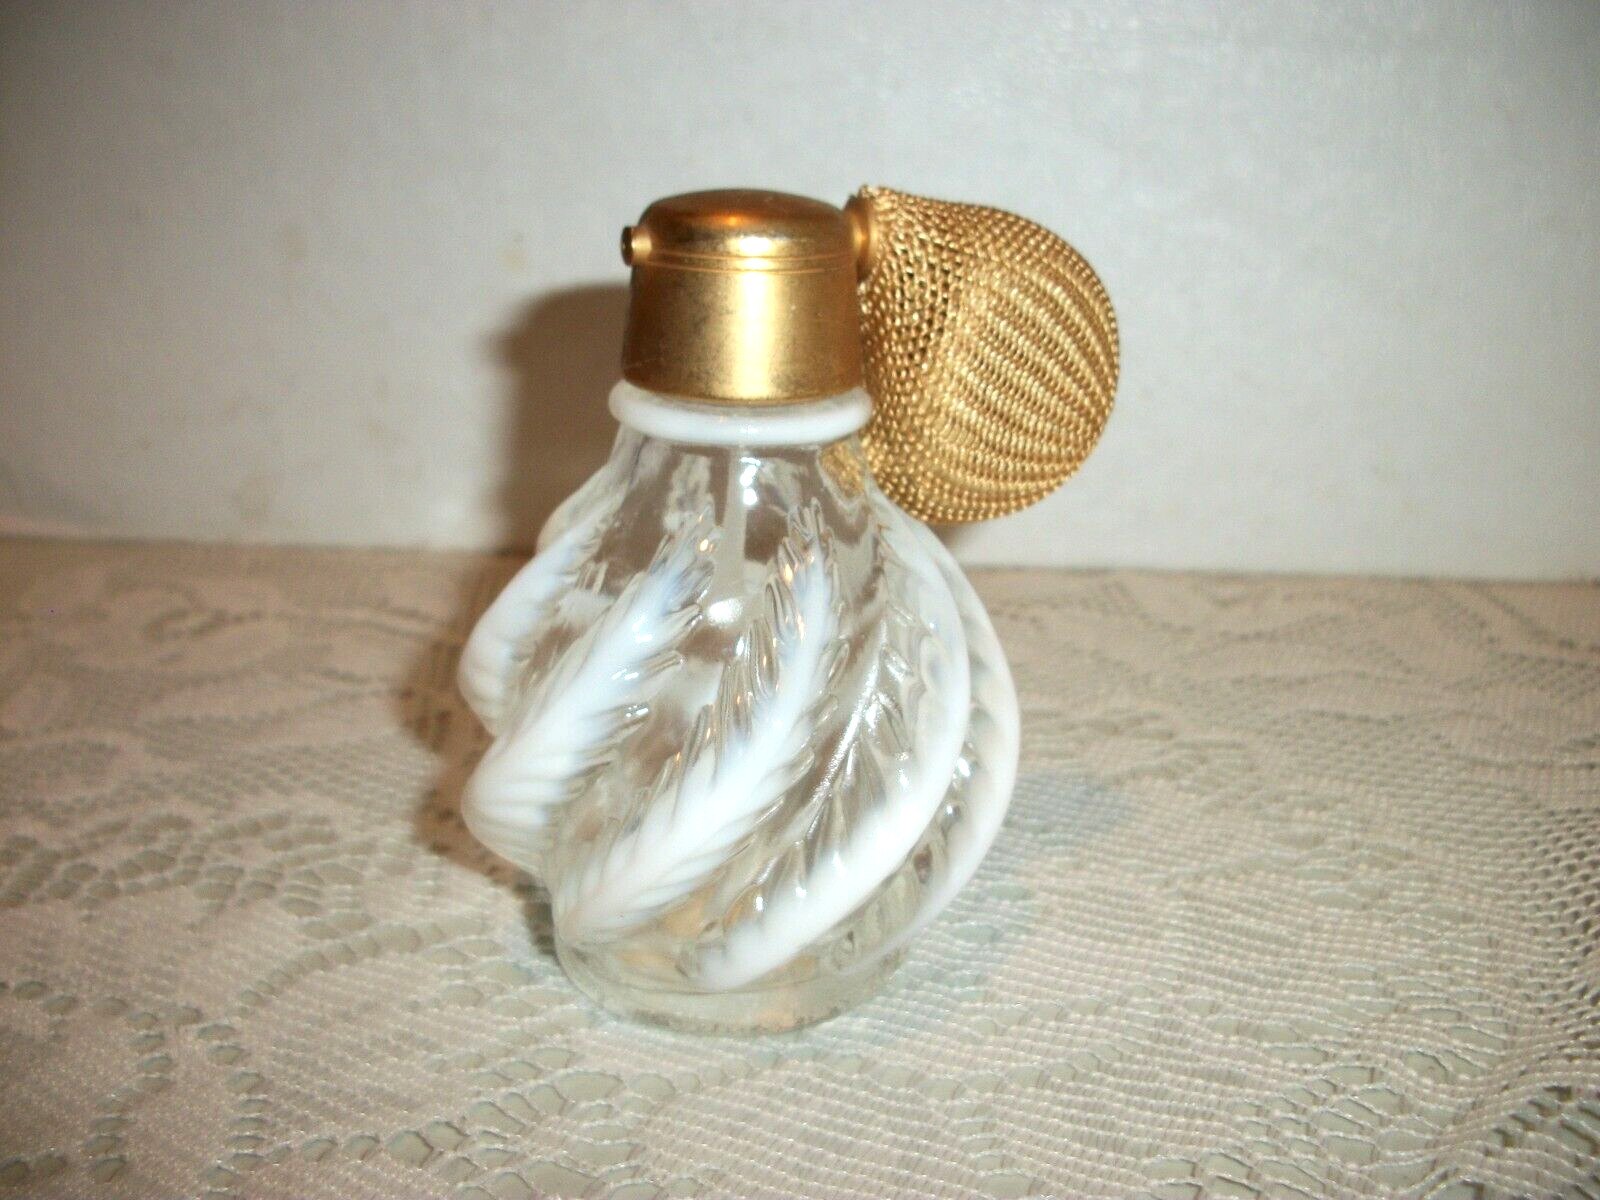 DeVilbiss Opalescent Feather Plume Perfume Bottle w/Atomizer,  Label